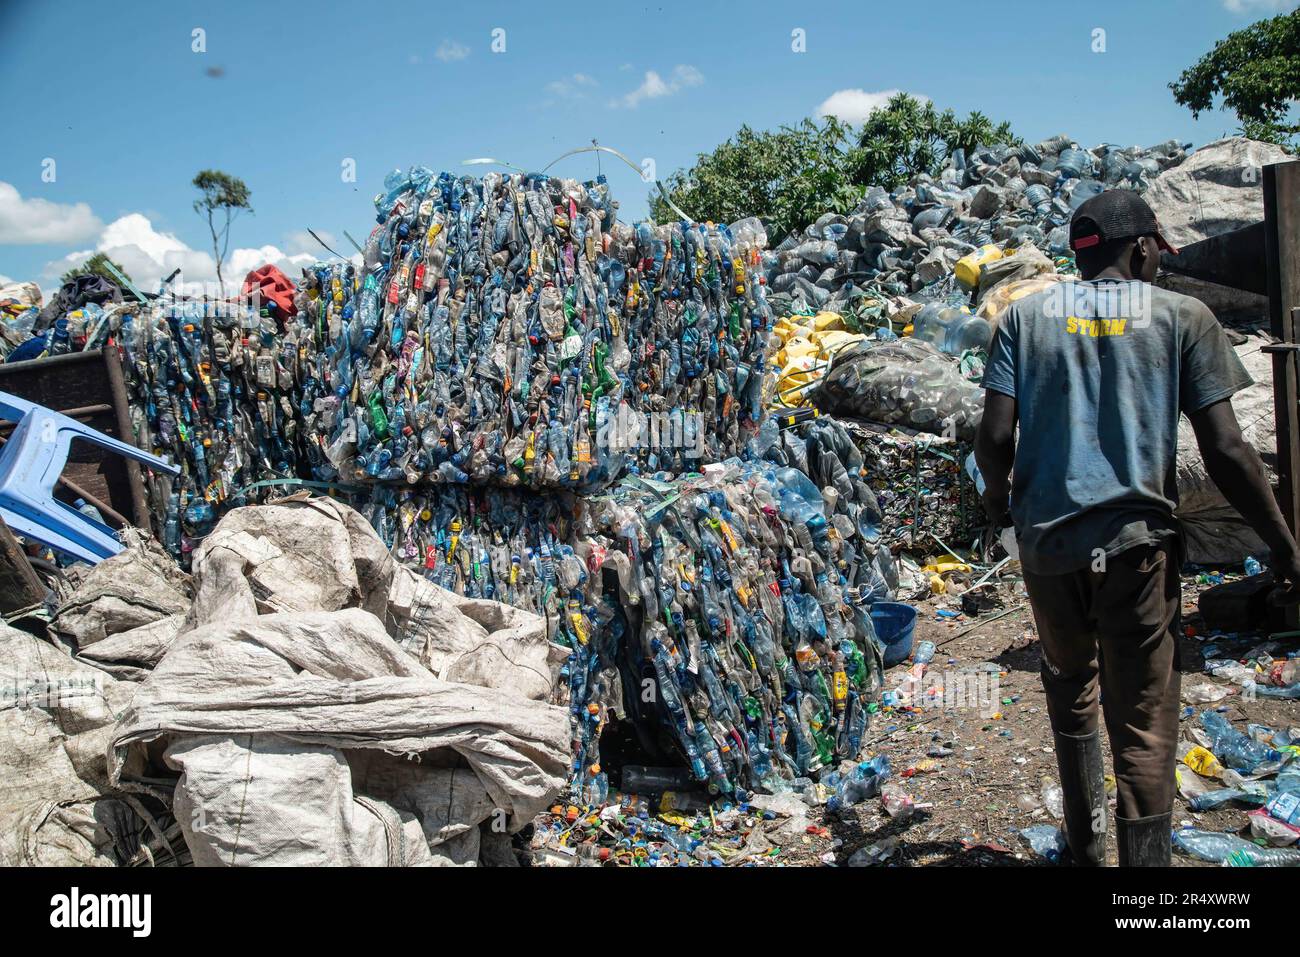 A worker is seen at a plastic recycling plant in Nakuru. Negotiators have gathered in Paris, France for the second round of deliberations to develop a global treaty aimed at tackling the escalating issue of plastic pollution. According to a recent report by the United Nations Environment Programme (UNEP), countries have the potential to reduce plastic pollution by 80% by 2040 by eliminating unnecessary plastics, implementing recycling and reuse strategies, introducing deposit return schemes, and substituting plastic with sustainable alternative materials. (Photo by James Wakibia/SOPA Images/ Stock Photo